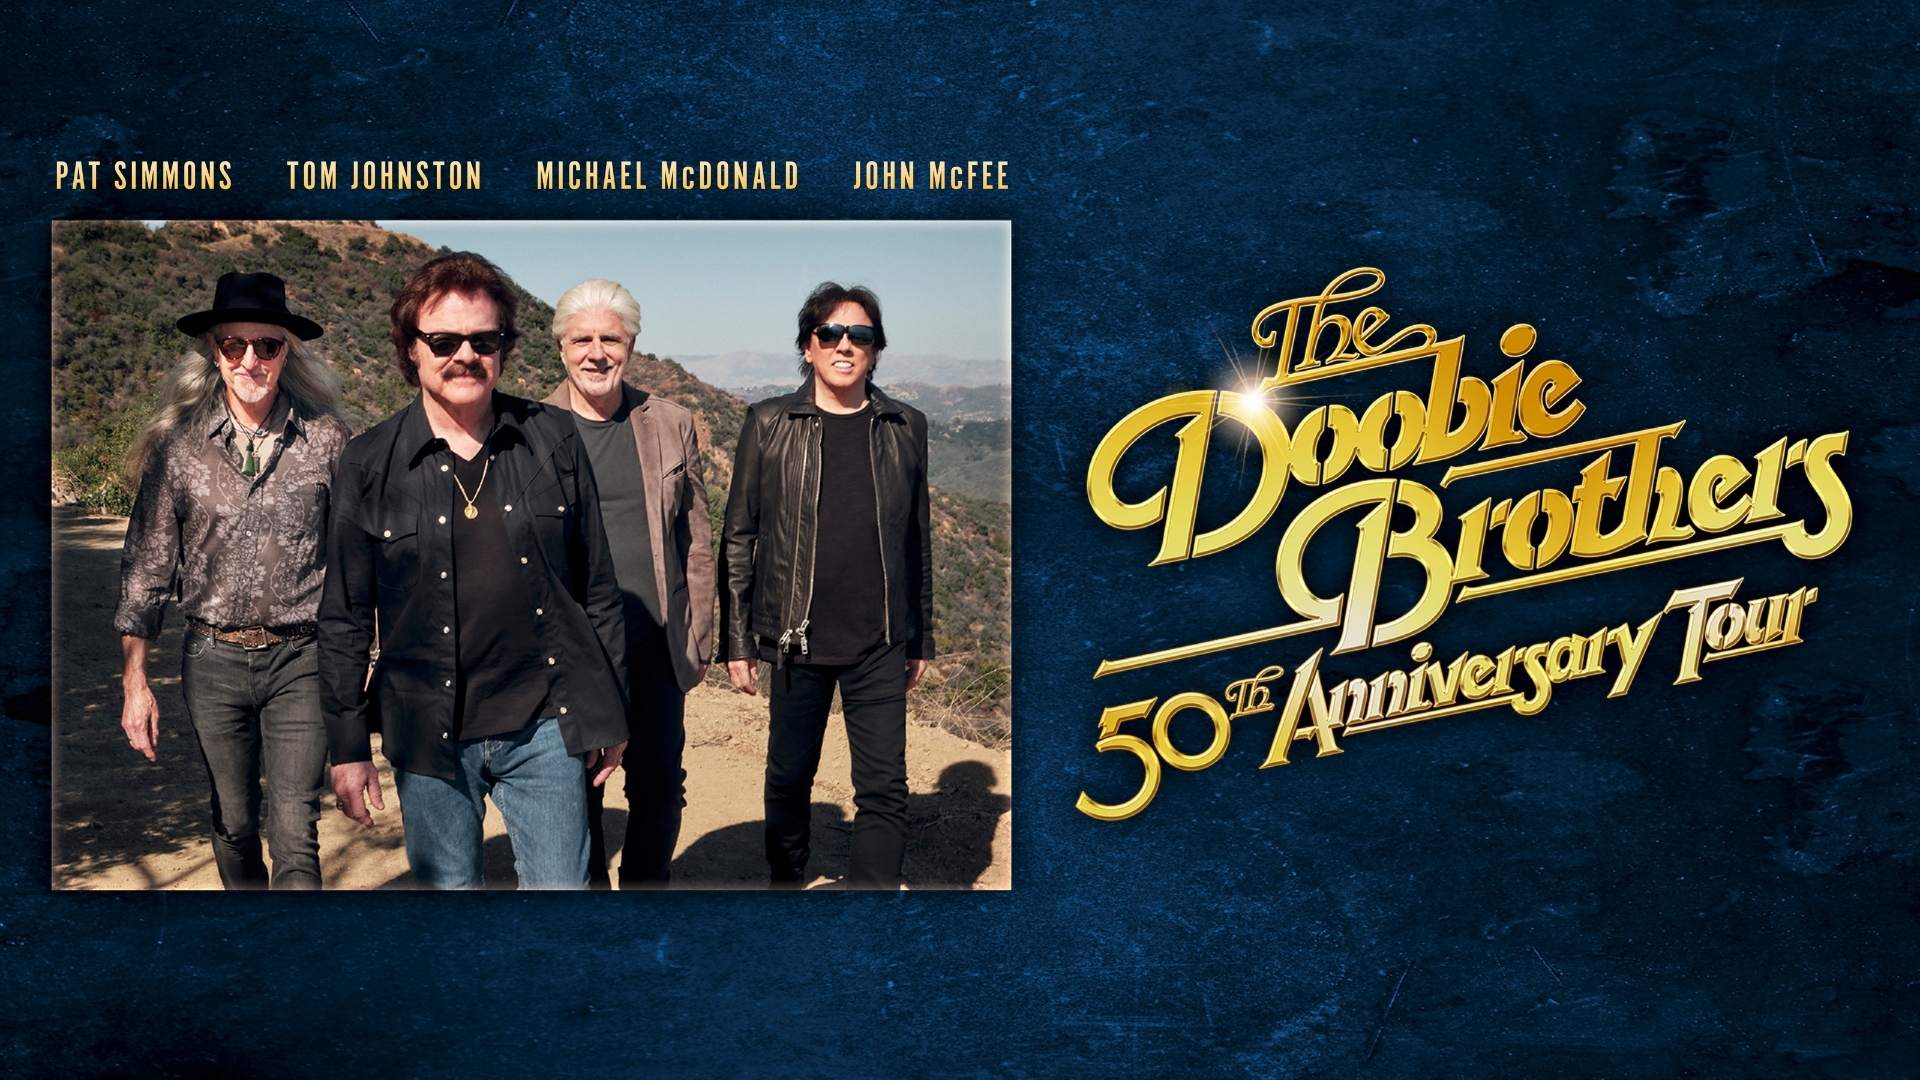 An Evening with The Doobie Brothers